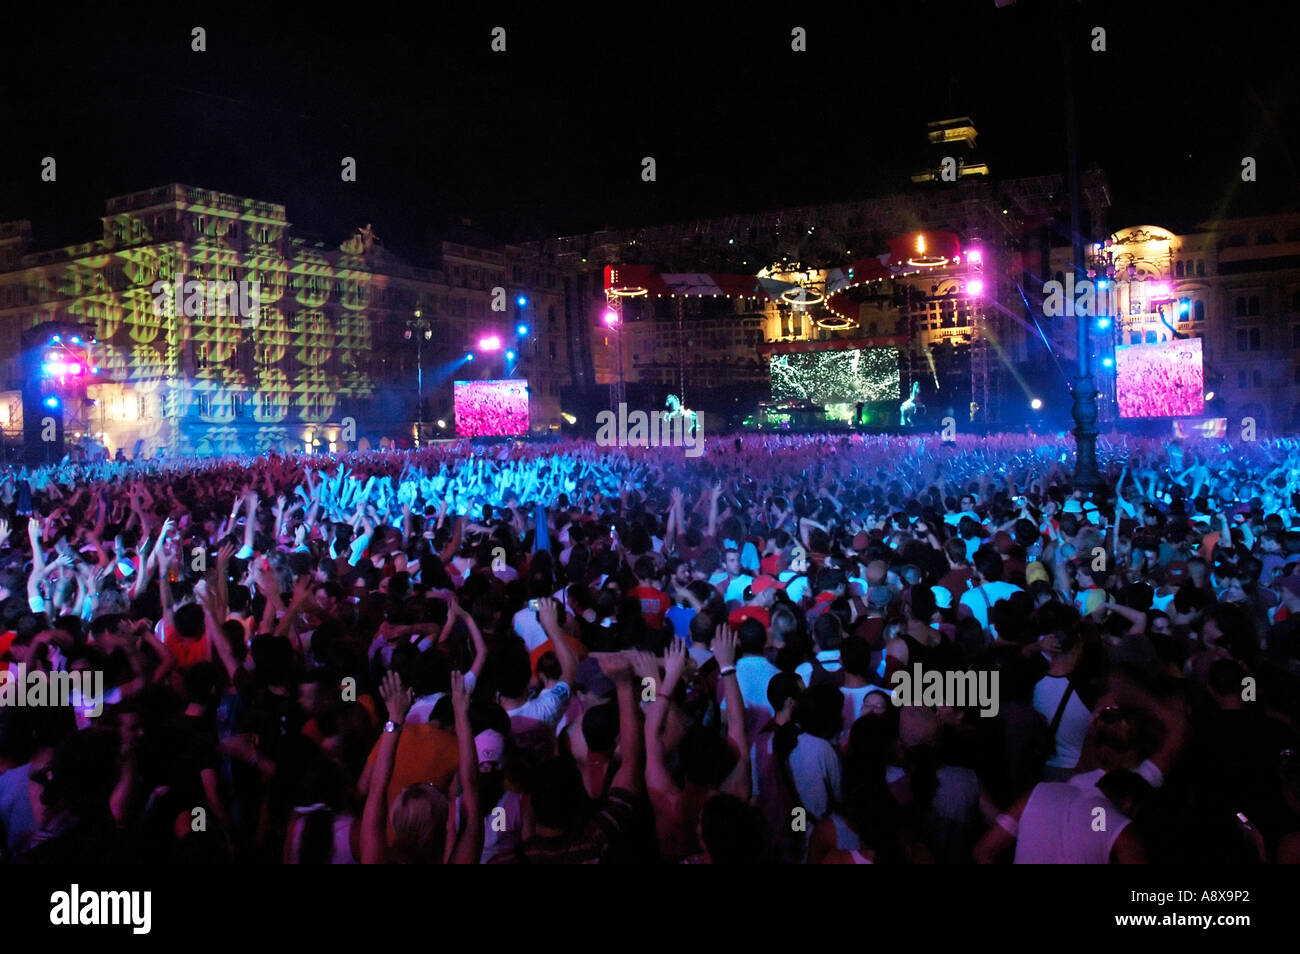 Chemical brothers performing on Isle of MTV event in Trieste, Italy Stock Photo